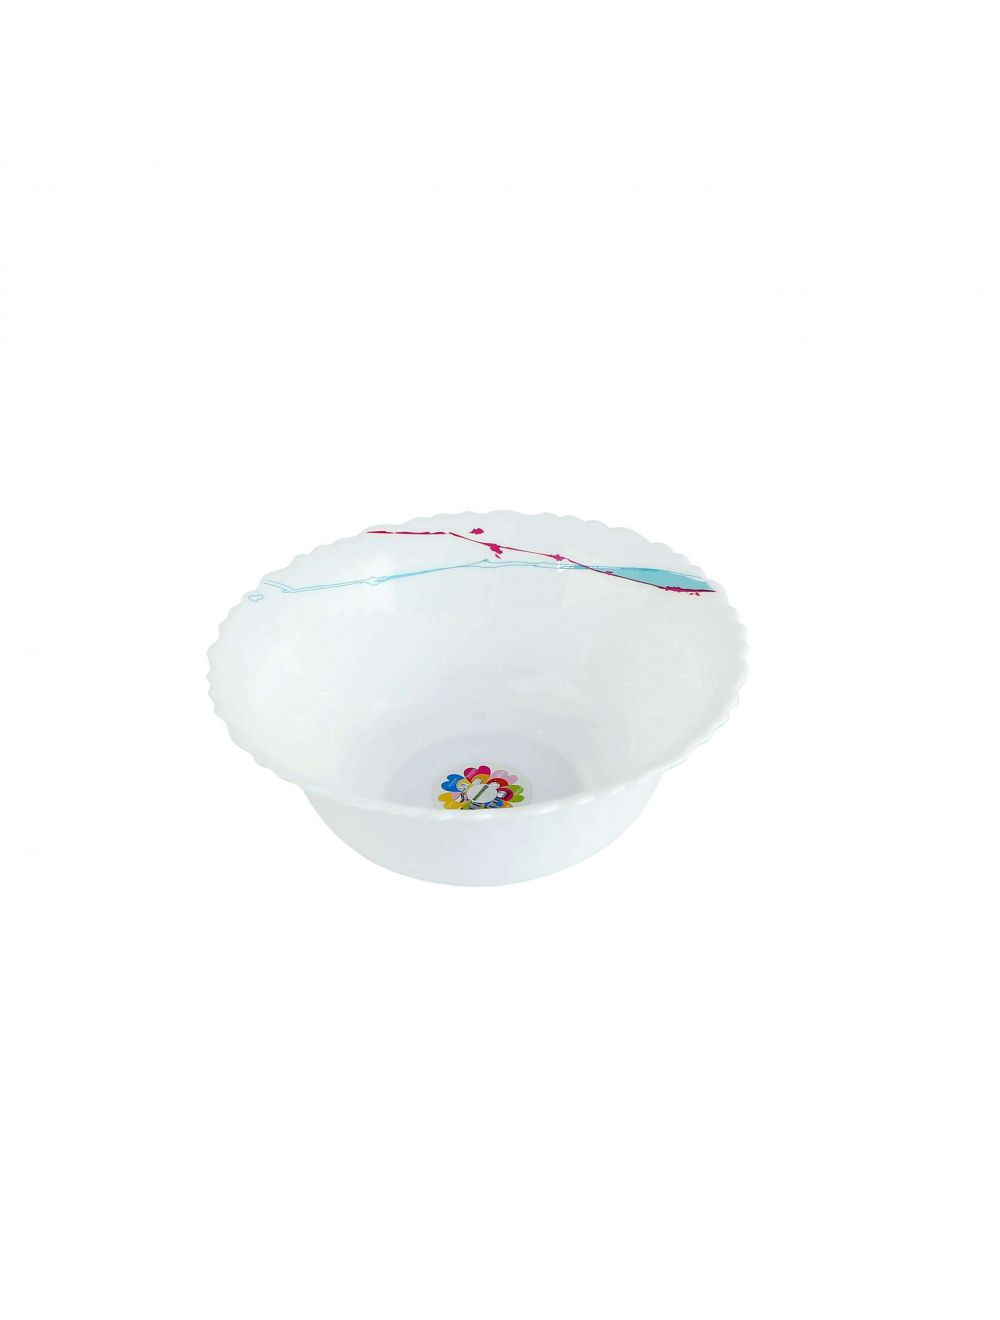 Royalford RF8877 5-inch Opalware Round Soup Bowl with Artflower Design